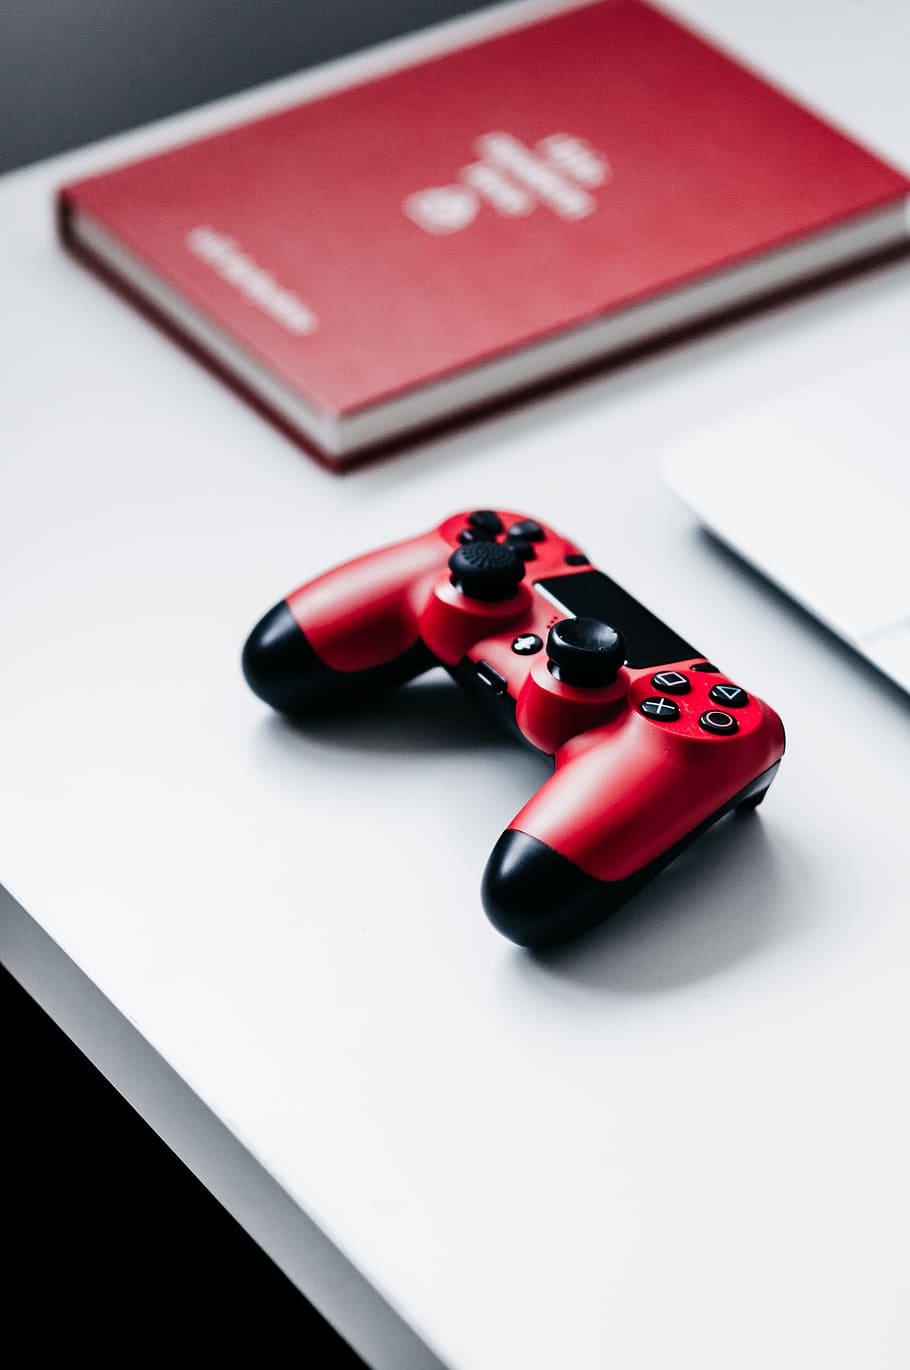 Playstation 4, Gaming, Desk, Book, Red, Controller, - Controller On A Desk - HD Wallpaper 